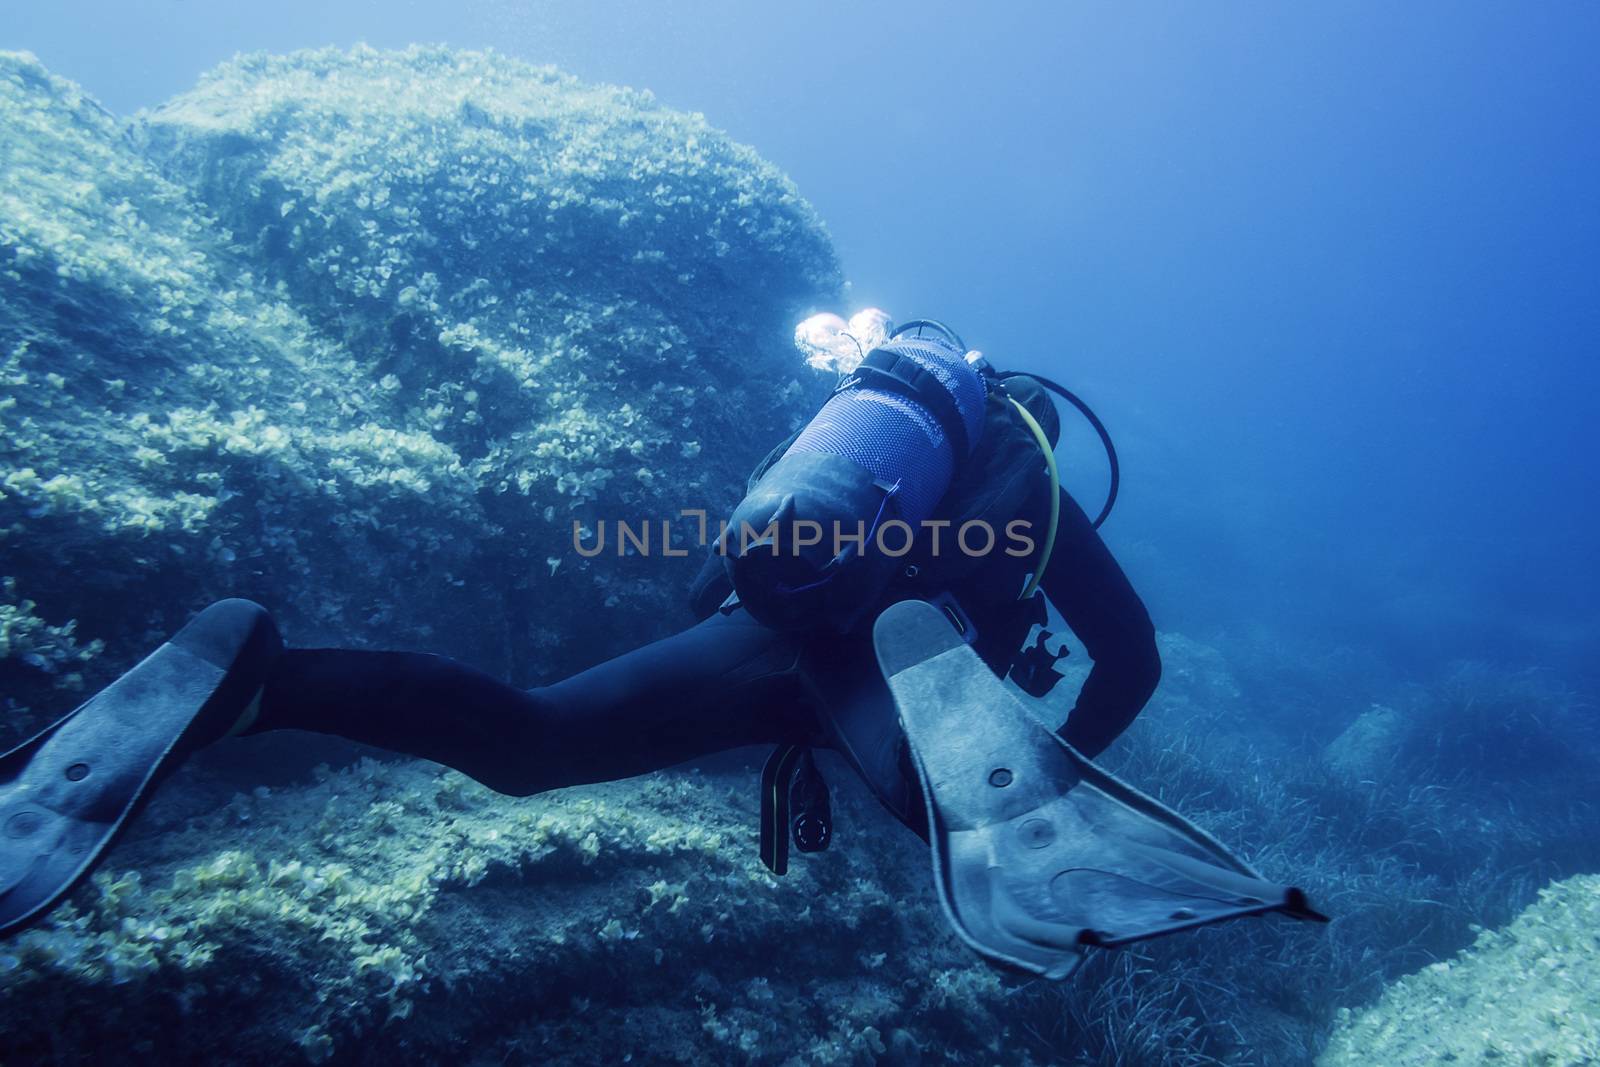 diver submerged near the bottom rocks, the water is blue and turquoise, the stones are covered with small algae. The diver turns his back to the camera and his fins are in the foreground